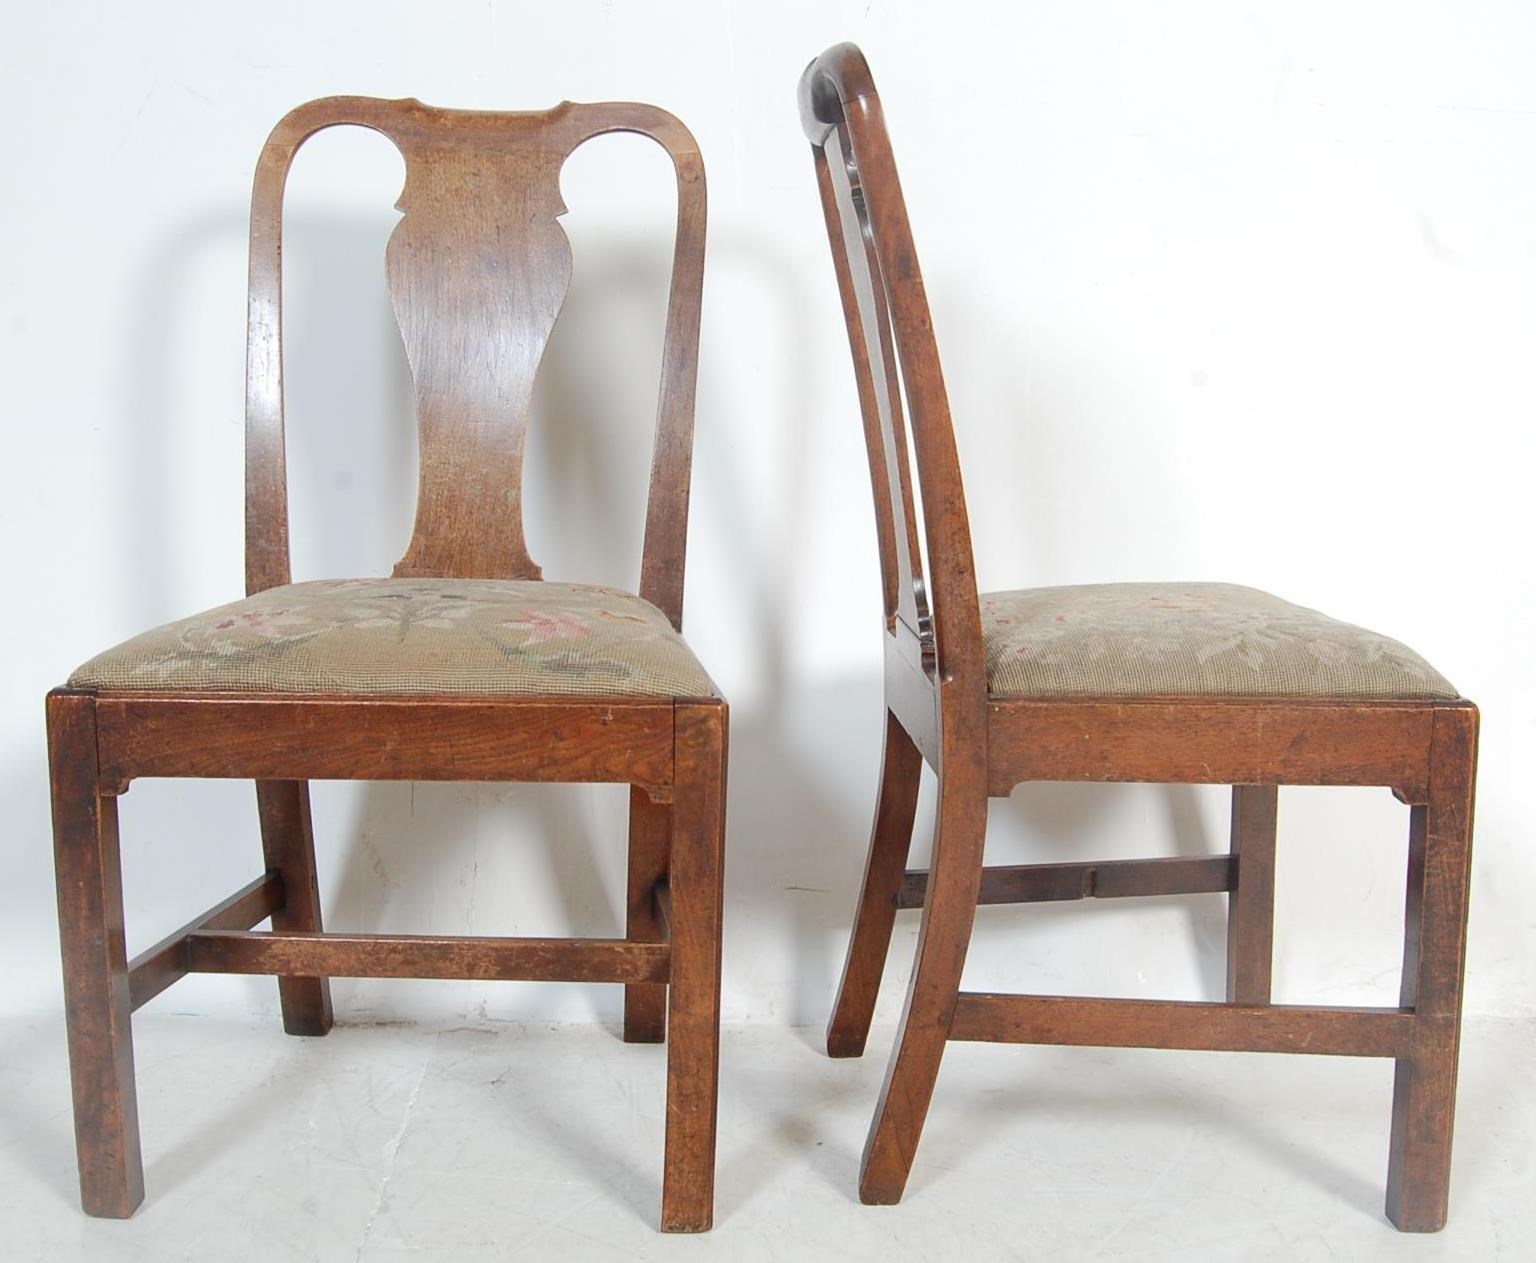 PAIR 18TH CENTURY QUEEN ANNE OAK BEDROOM CHAIRS - Image 7 of 8